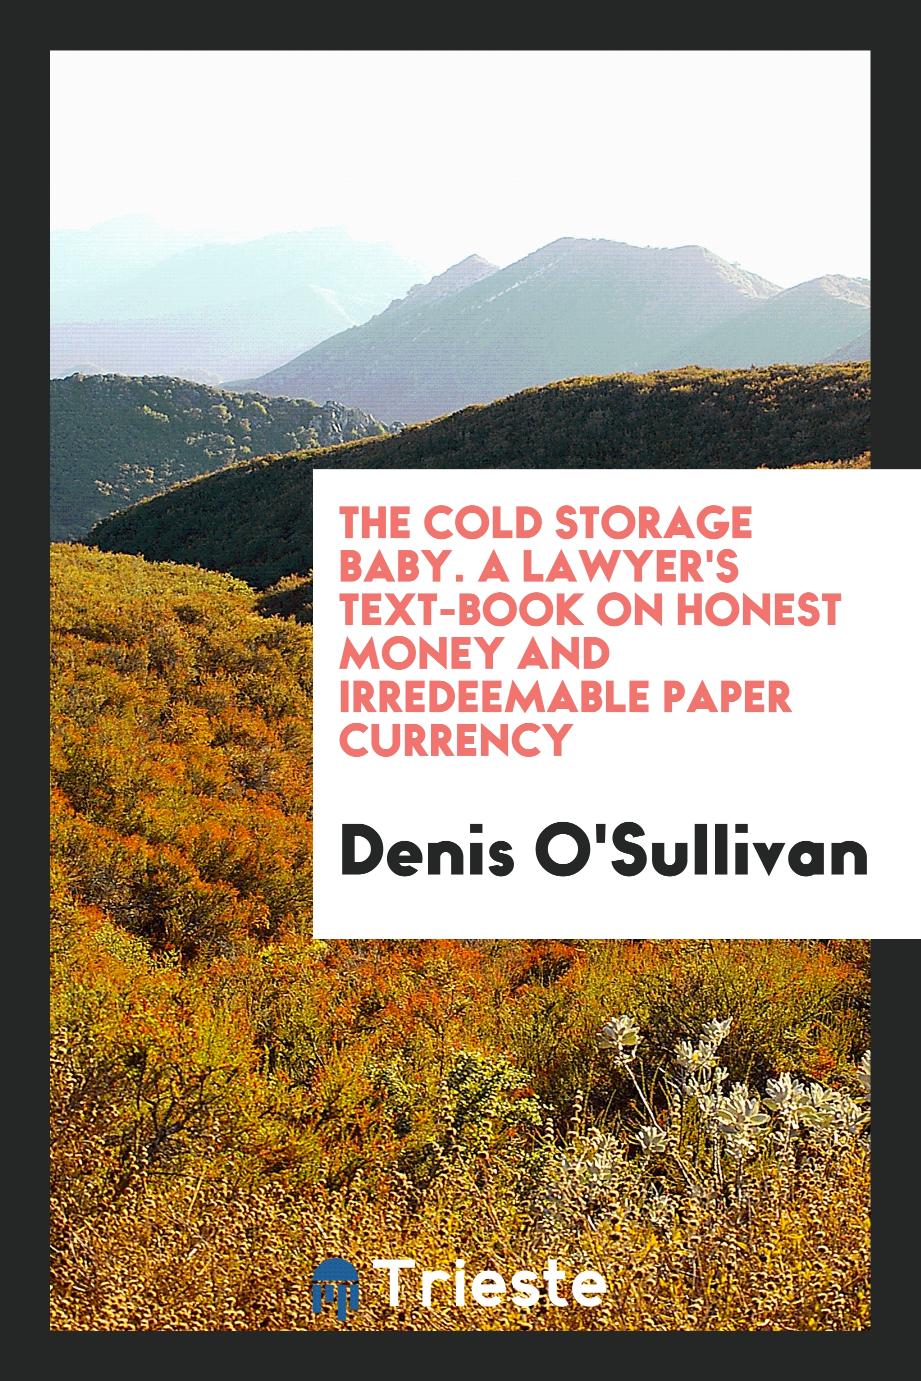 The Cold Storage Baby. A Lawyer's Text-Book on Honest Money and Irredeemable Paper Currency